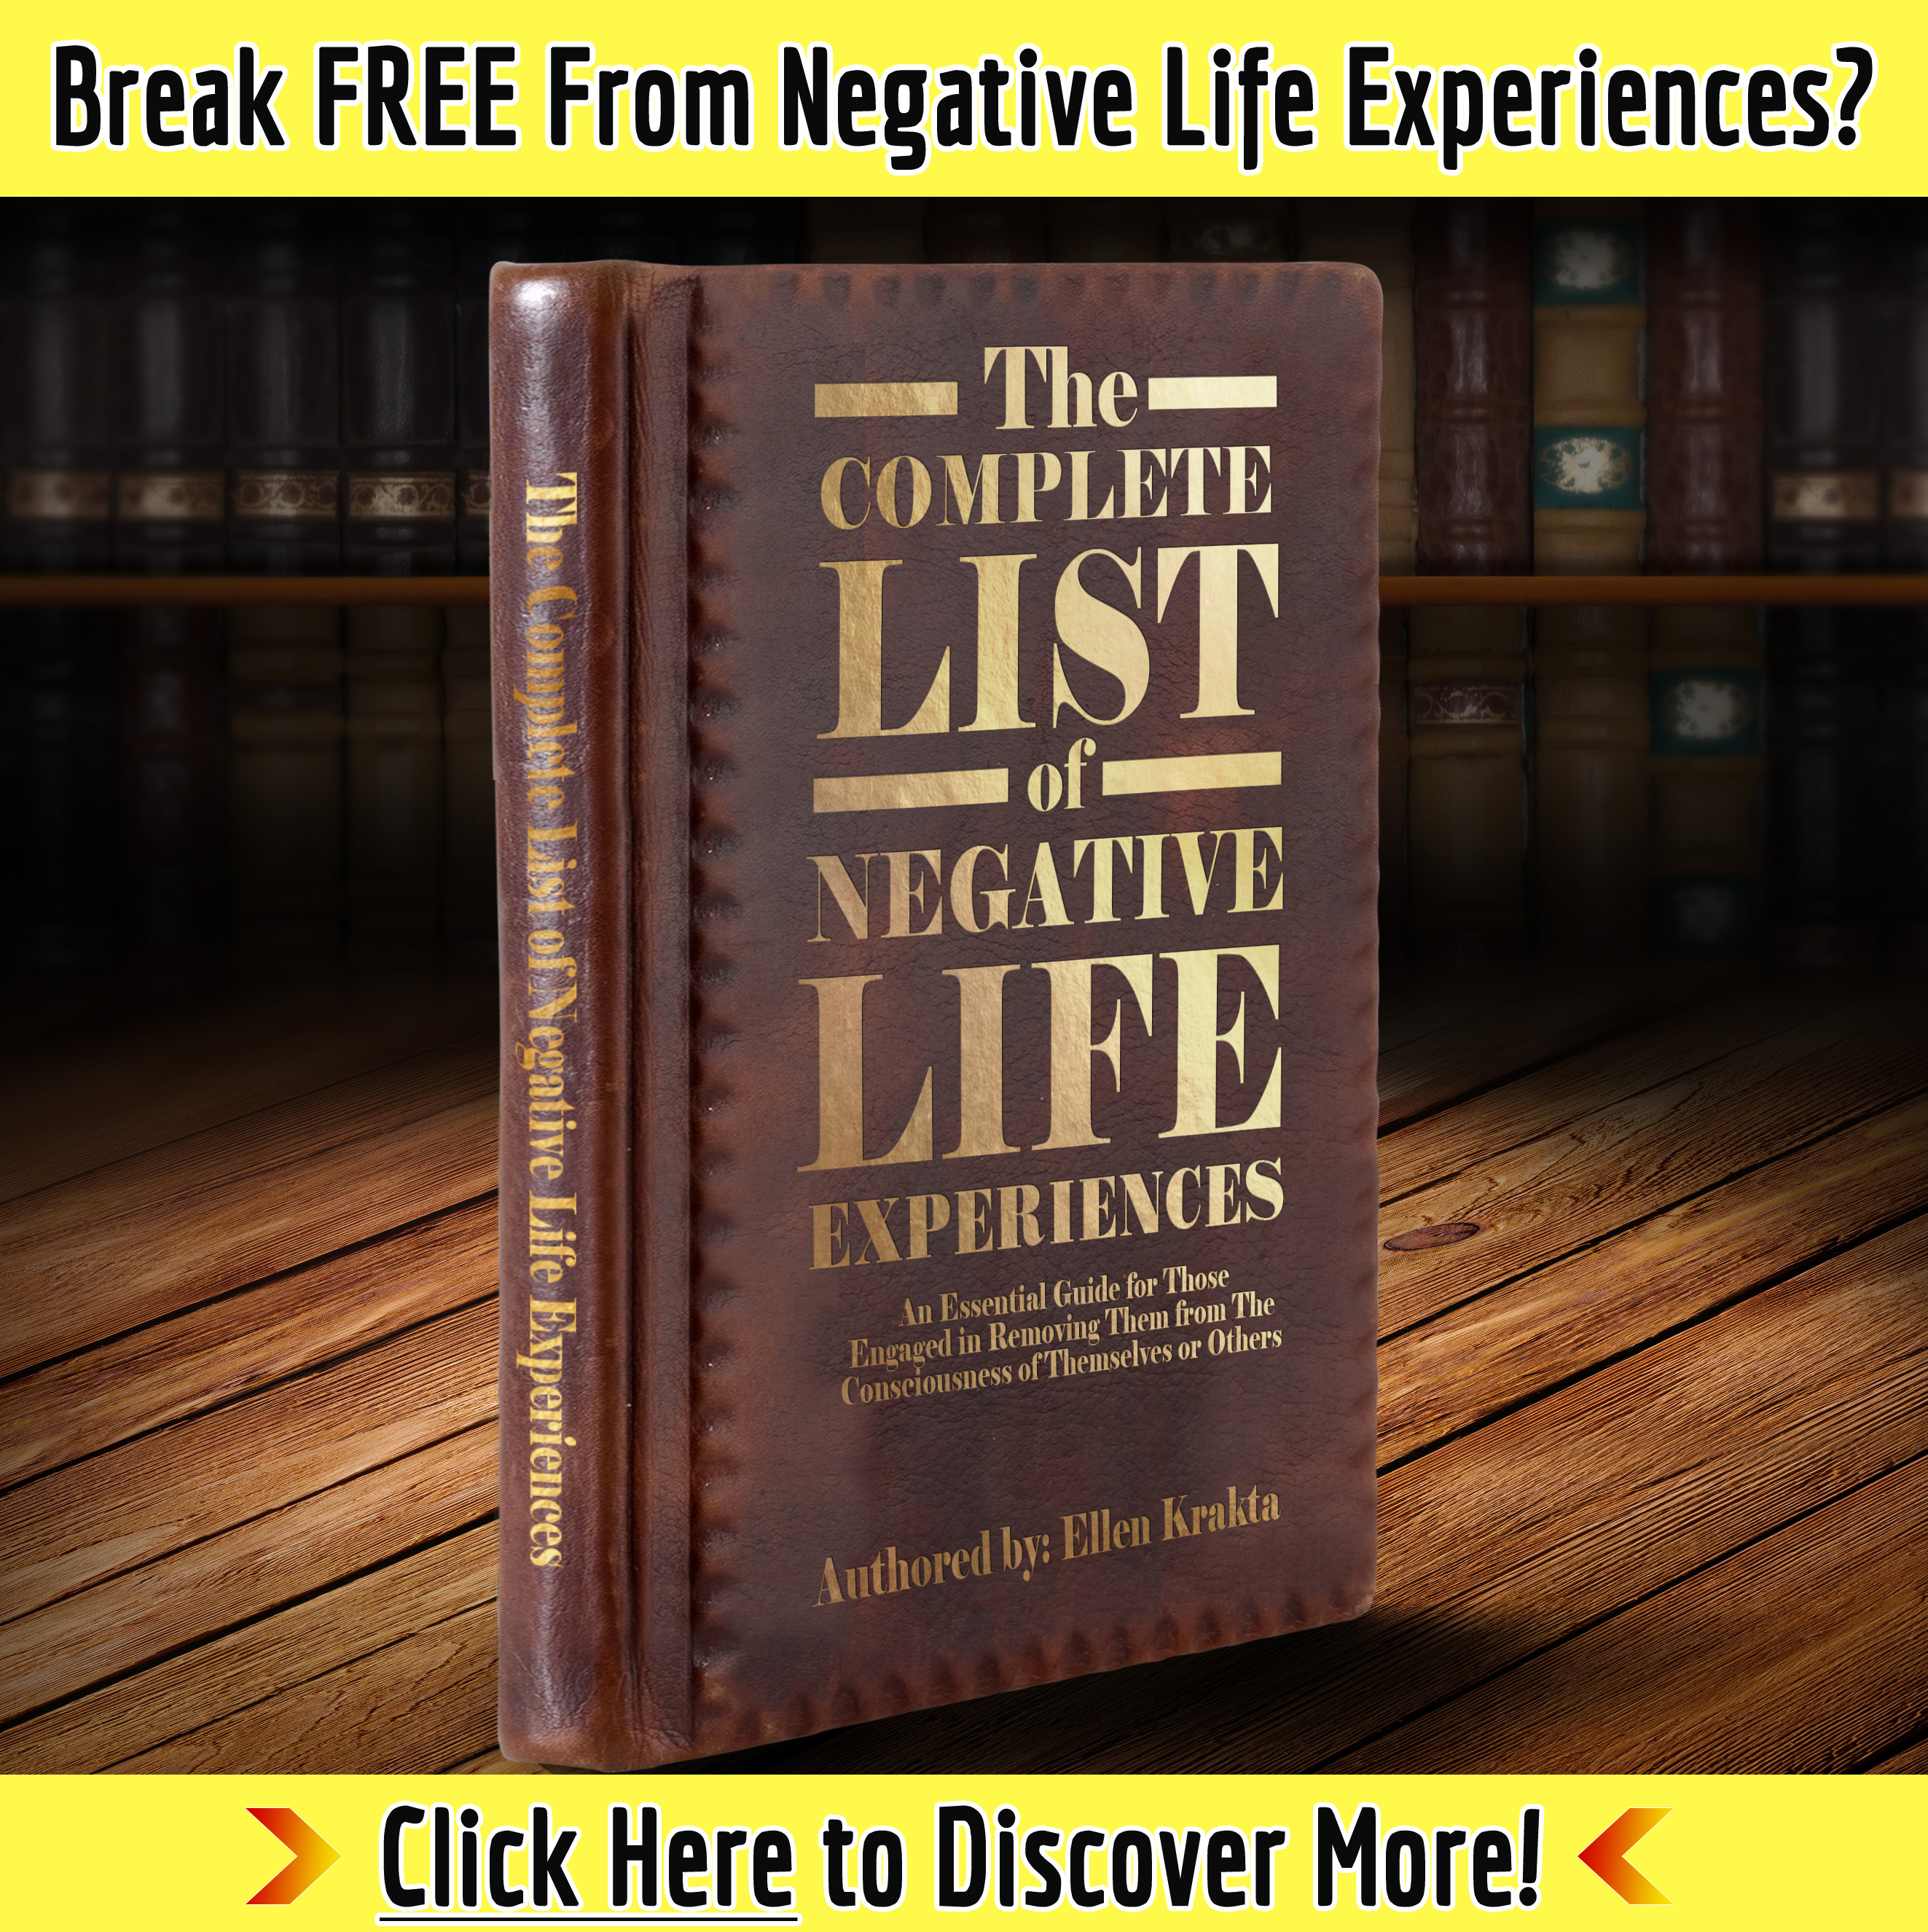 Click Here to See How to Deal with Negative Life Experiences!